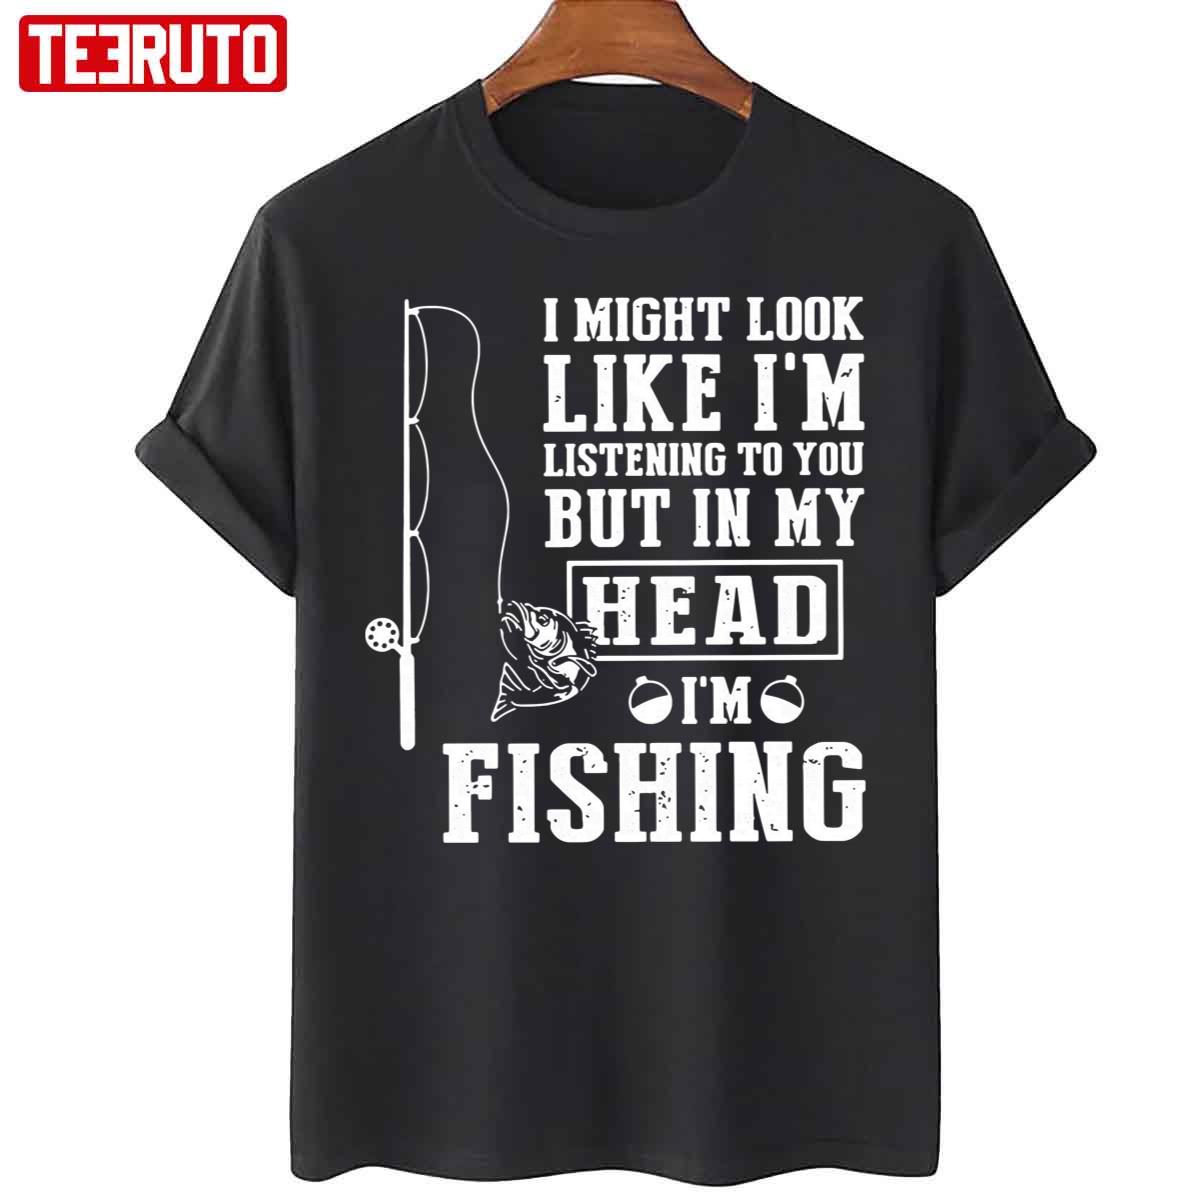 I Might Look Like I’m Listening To You But In My Head I’m Fishing Unisex T-Shirt